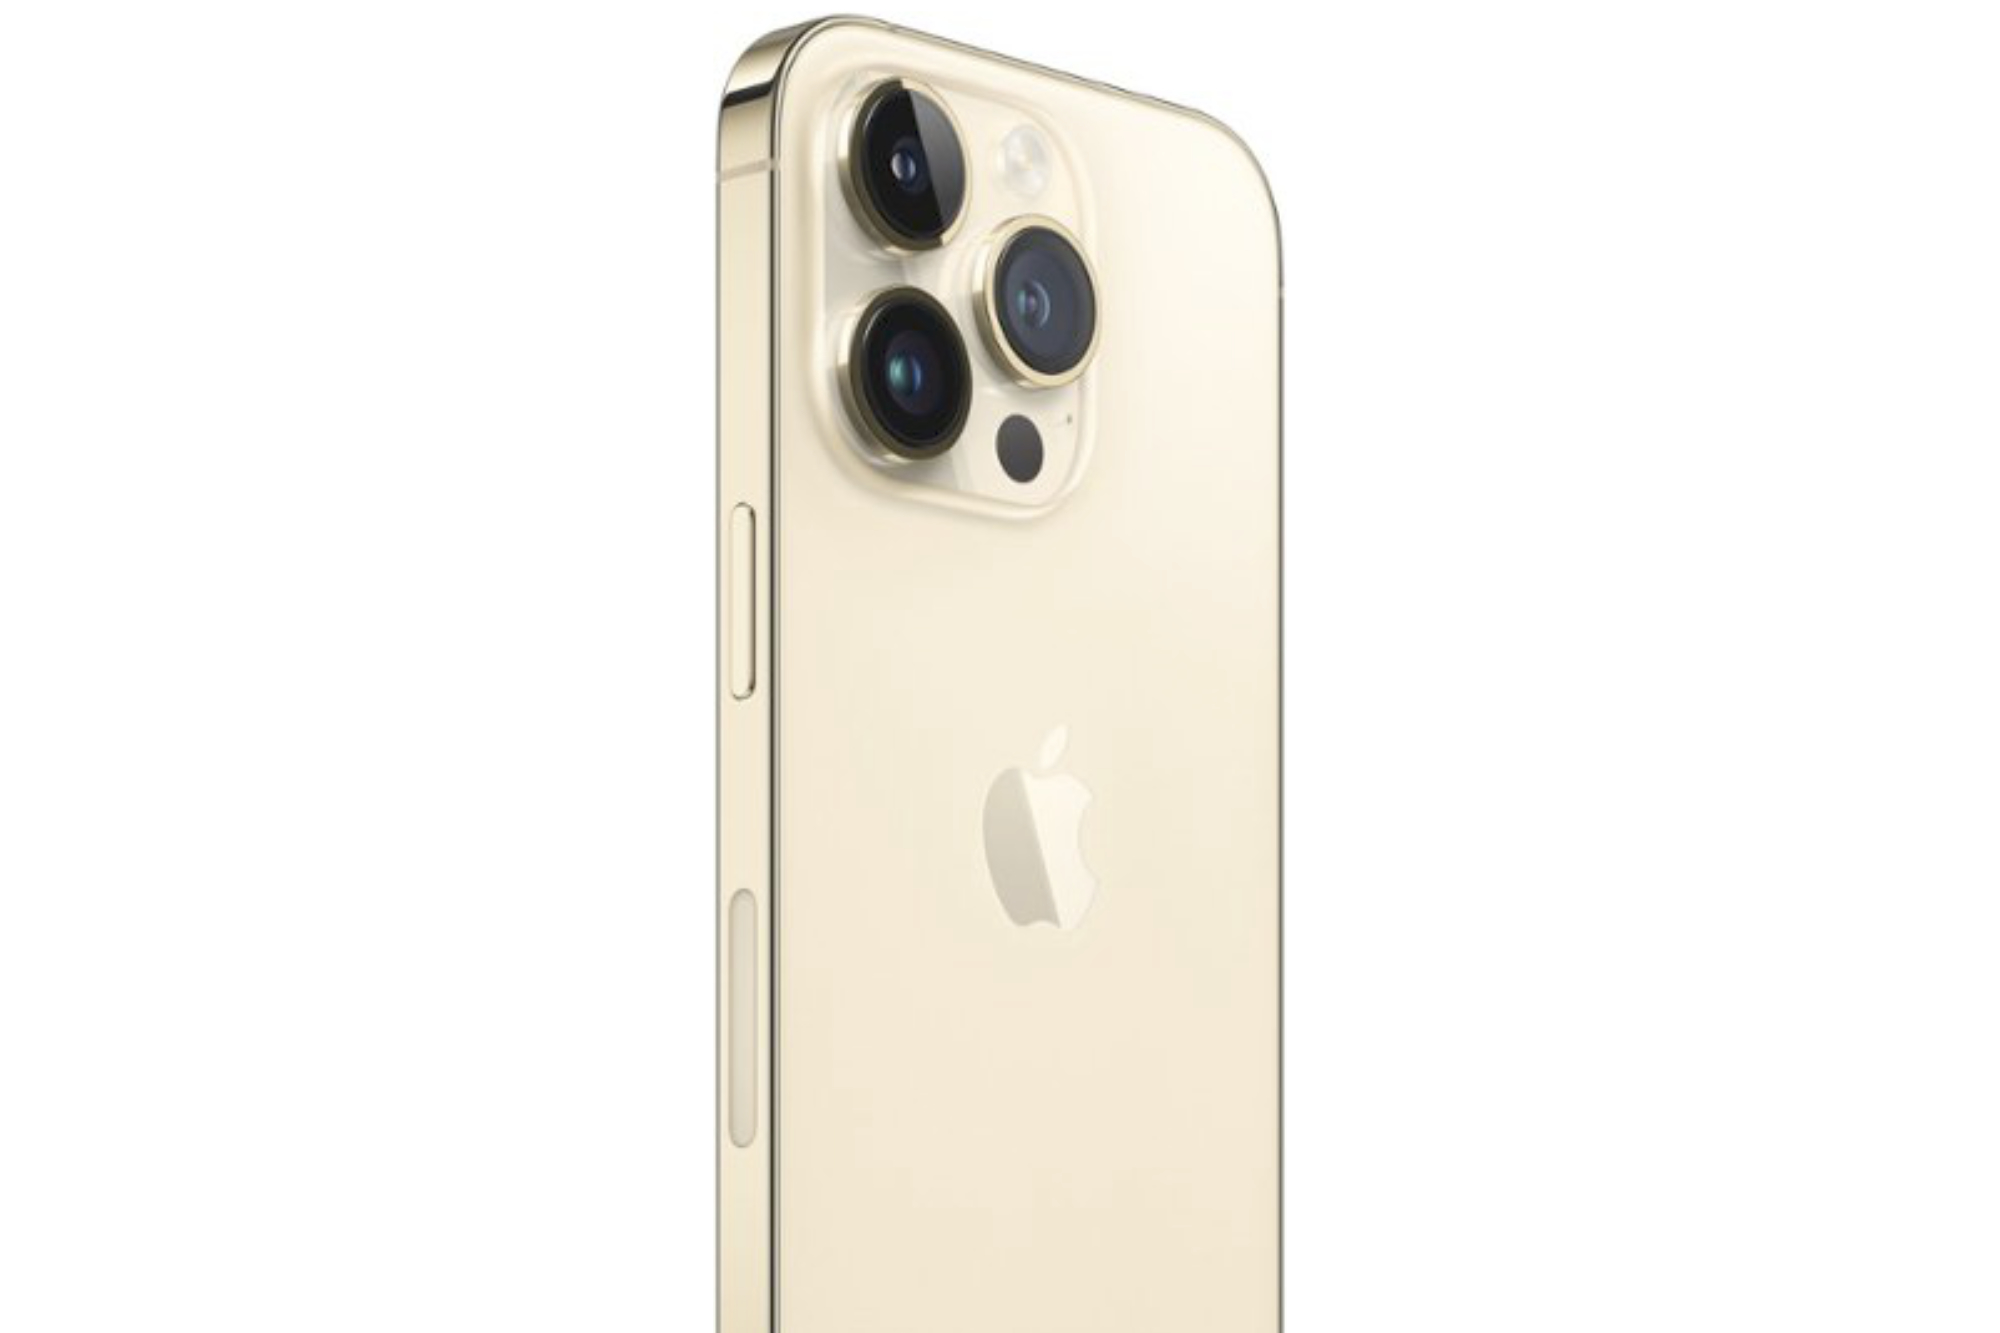 The gold iPhone 14 Pro.